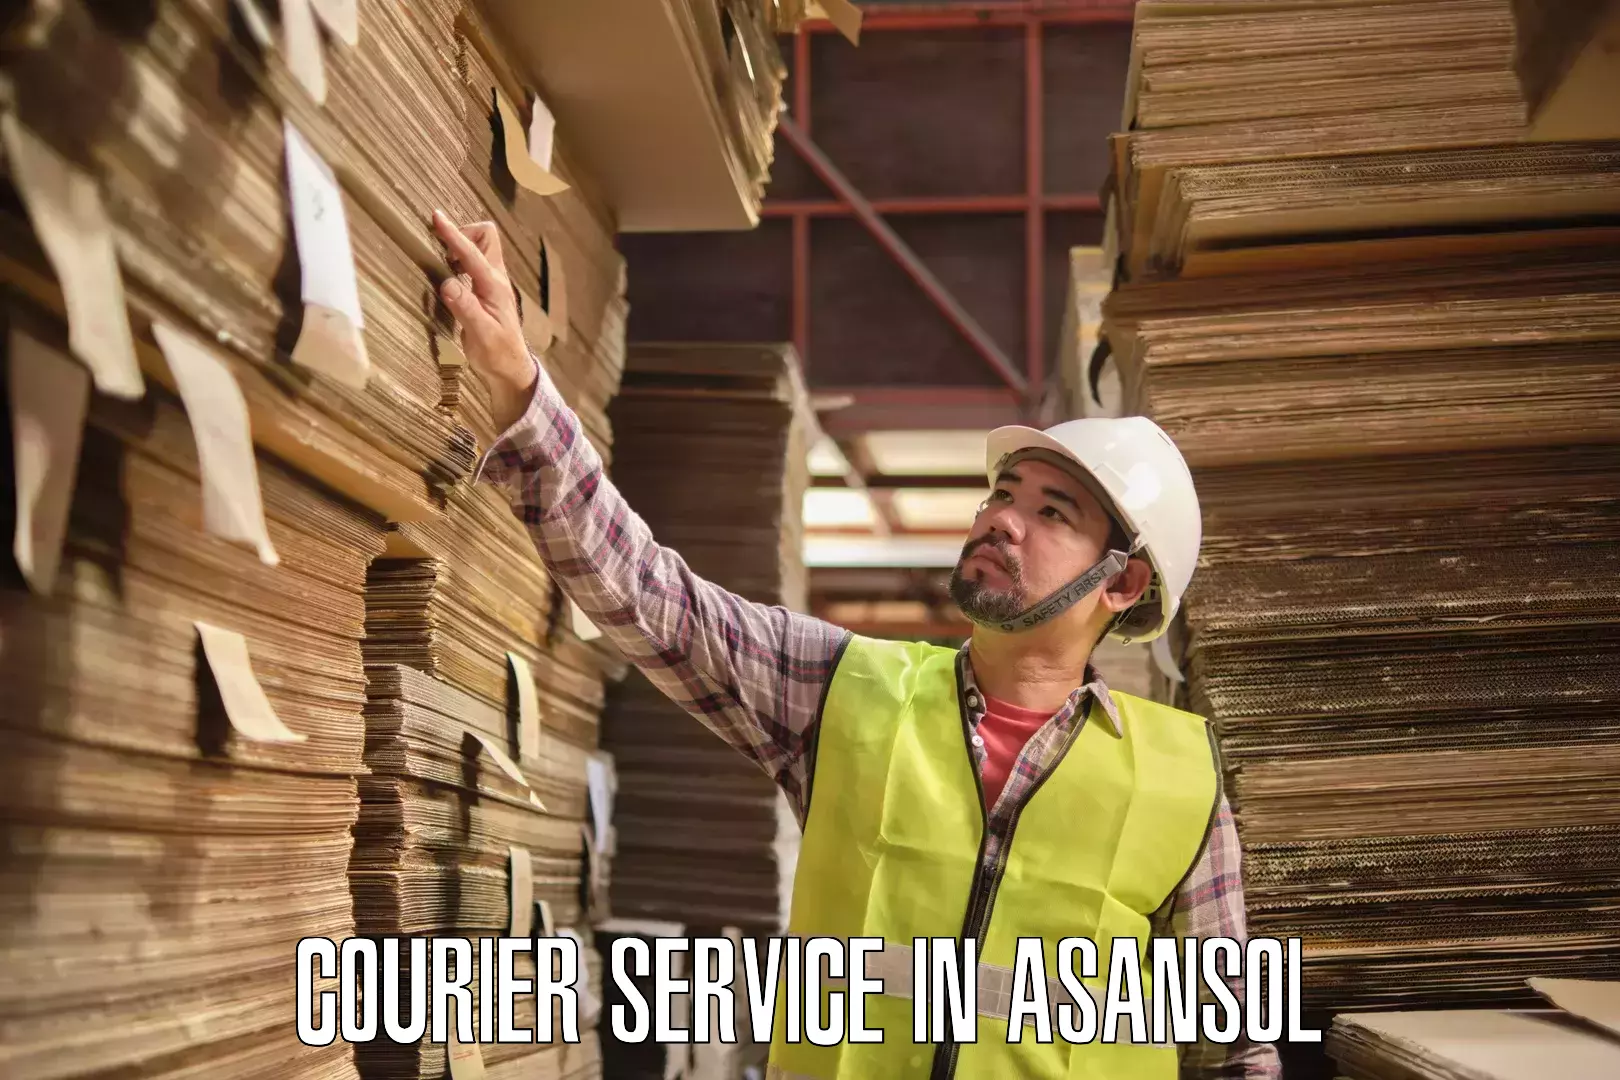 Delivery service partnership in Asansol